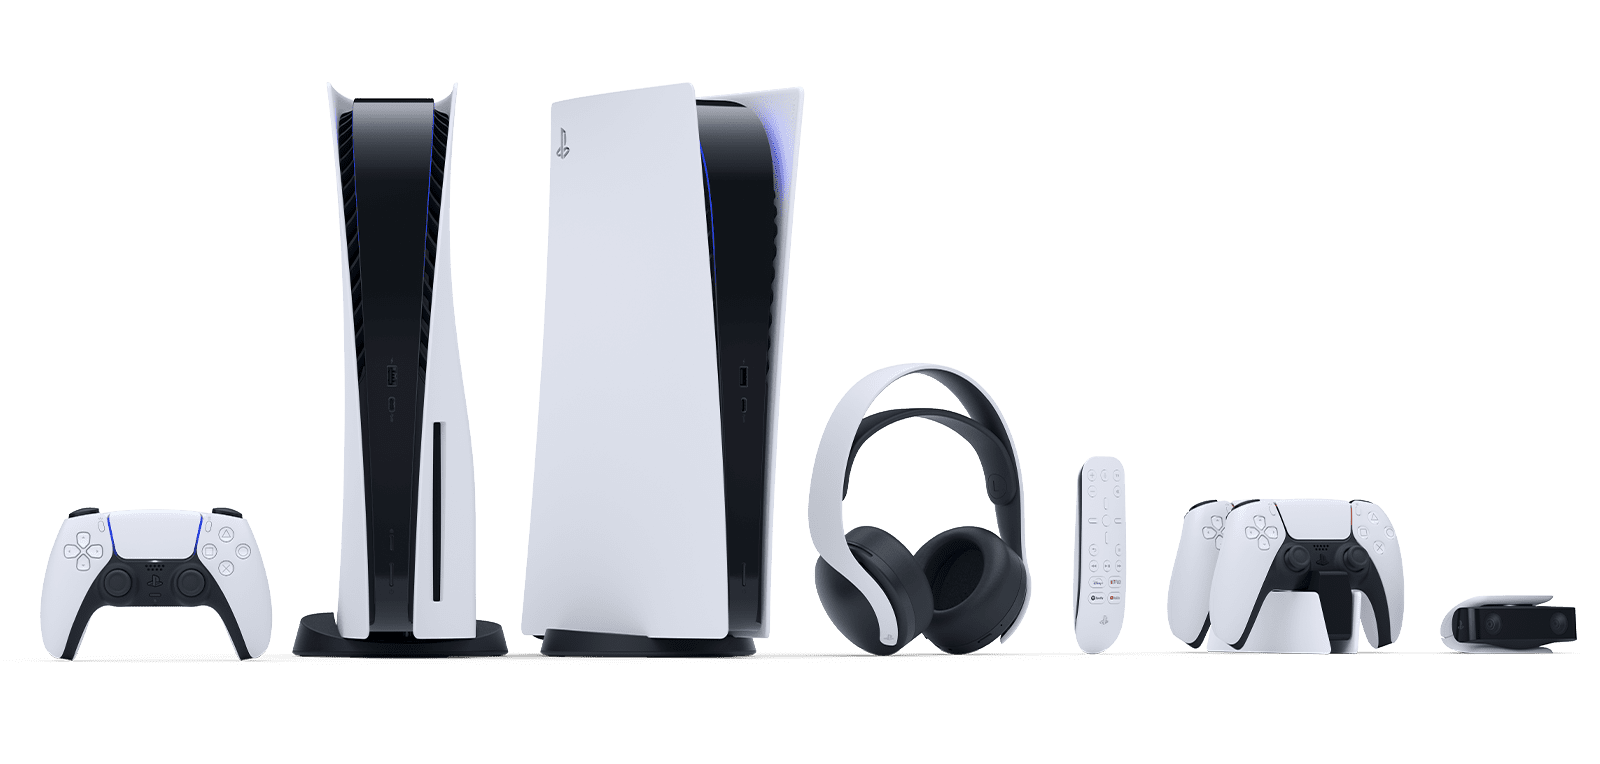 Sony PlayStation 5 and accessories